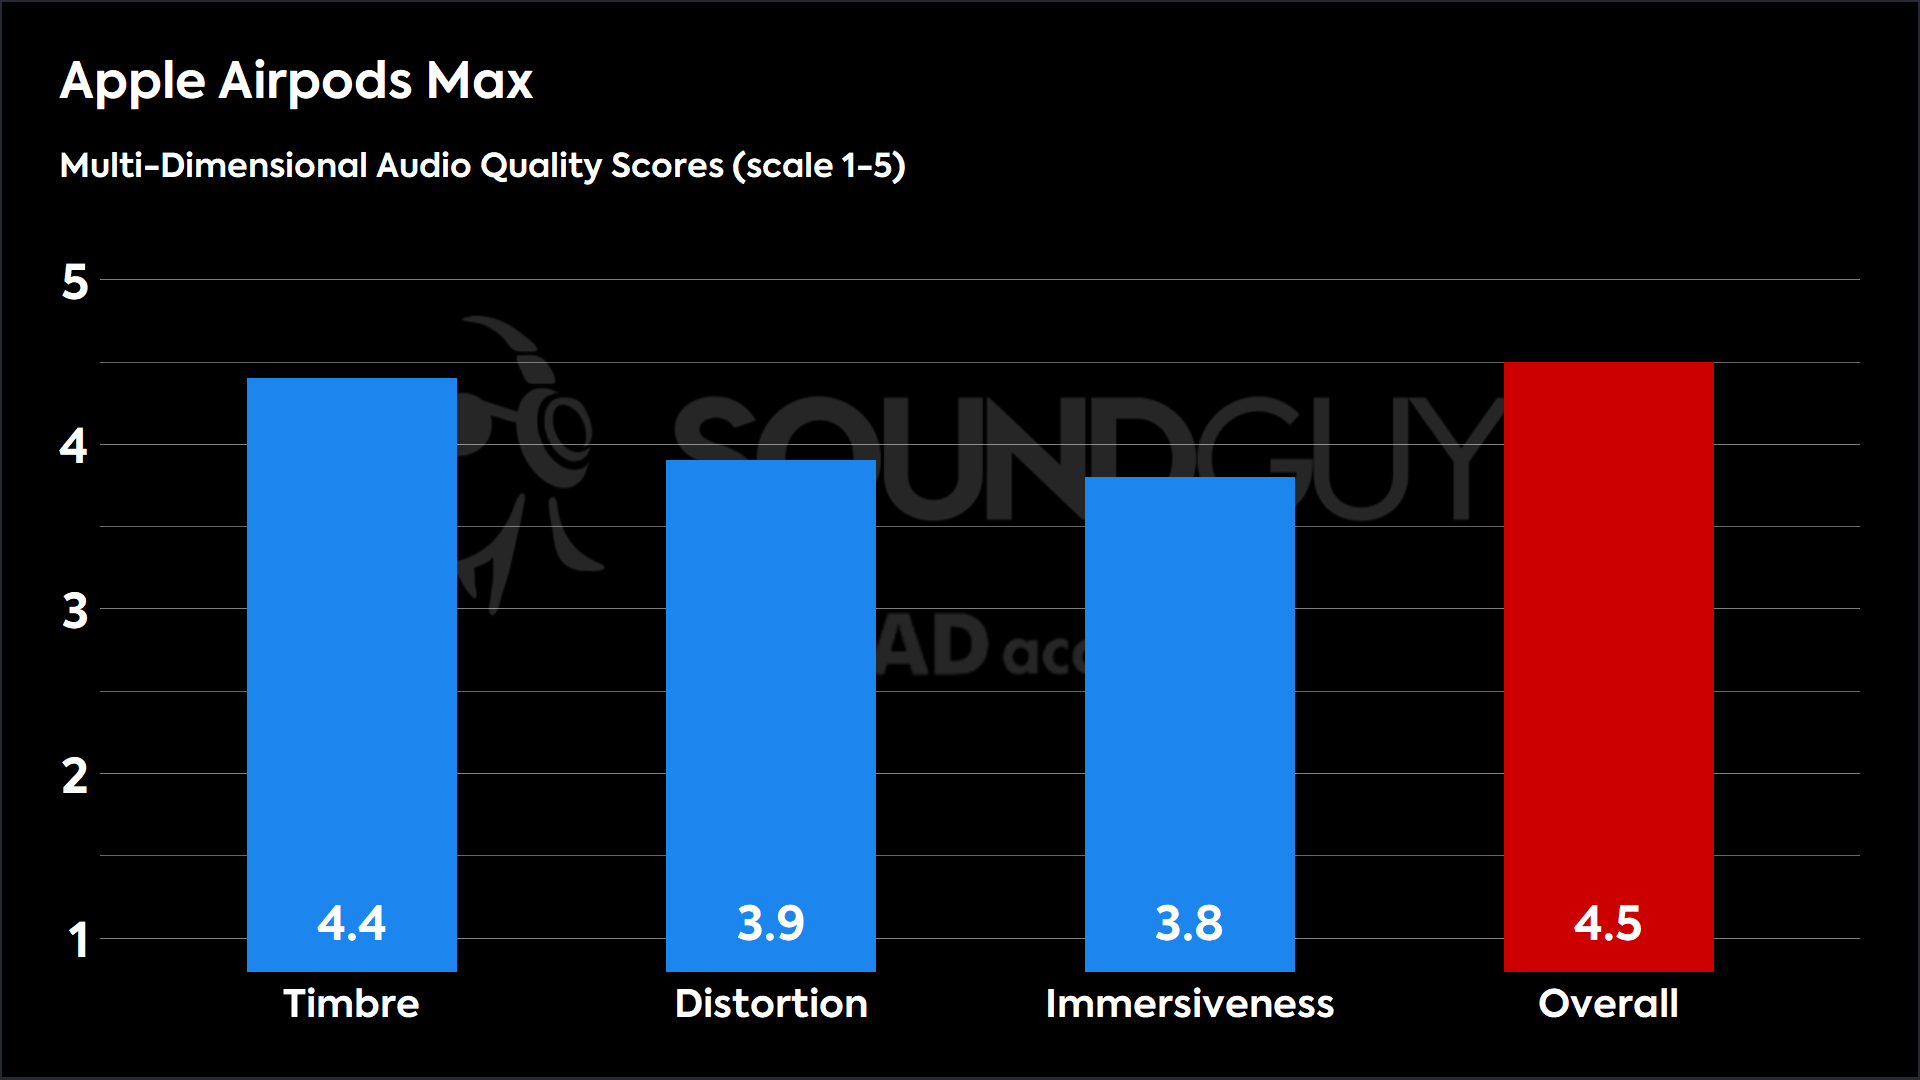 This chart shows the MDAQS results for the Apple Airpods Max in Default mode. The Timbre score is 4.4, The Distortion score is 3.9, the Immersiveness score is 3.8, and the Overall Score is 4.5.